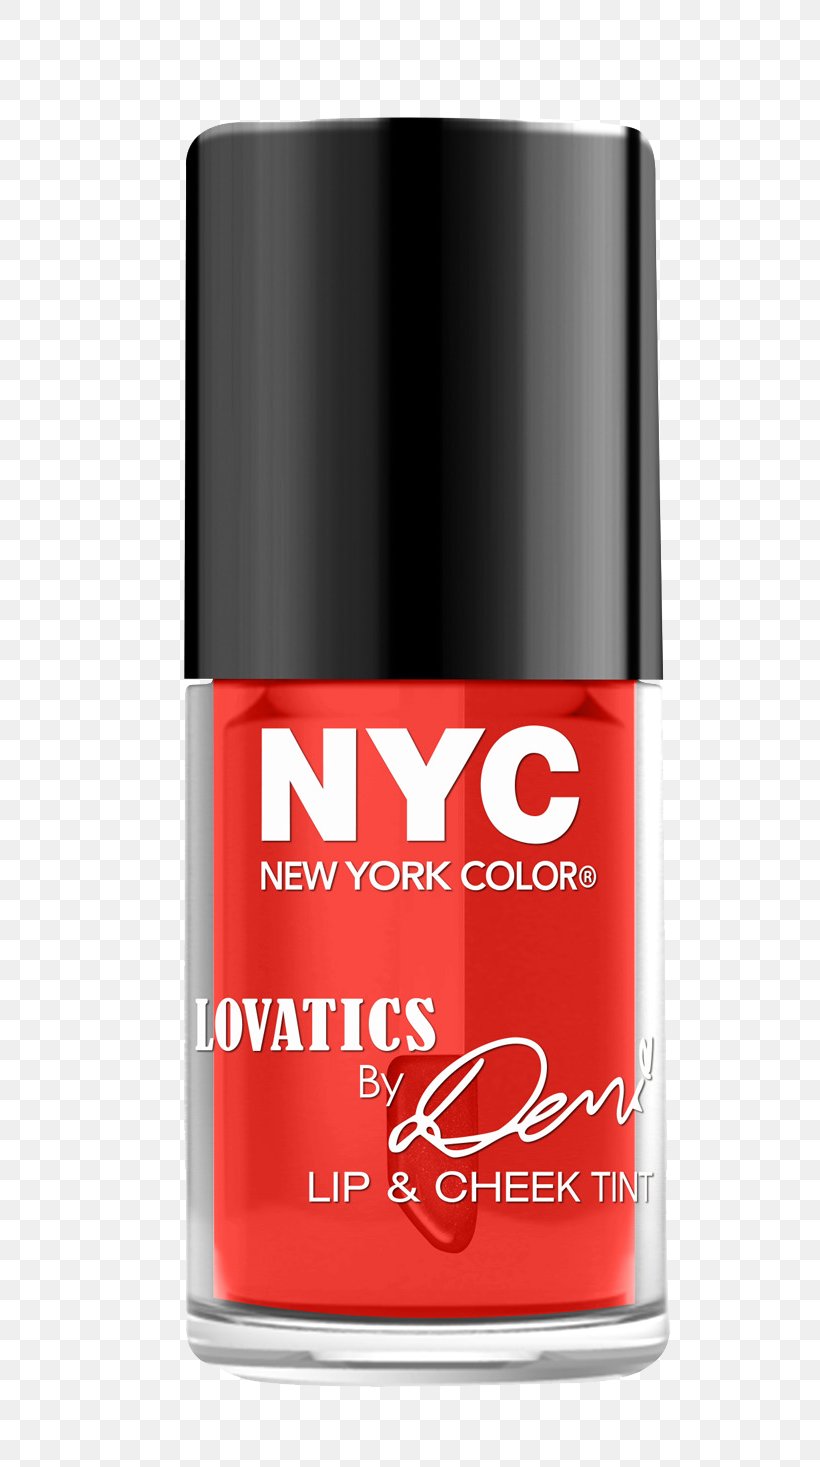 NYC Lovatics By Demi Eyeshadow Palette New York City Tints And Shades Lip Stain Color, PNG, 719x1467px, New York City, Body Shop Lip Cheek Stain, Cheek, Color, Cosmetics Download Free